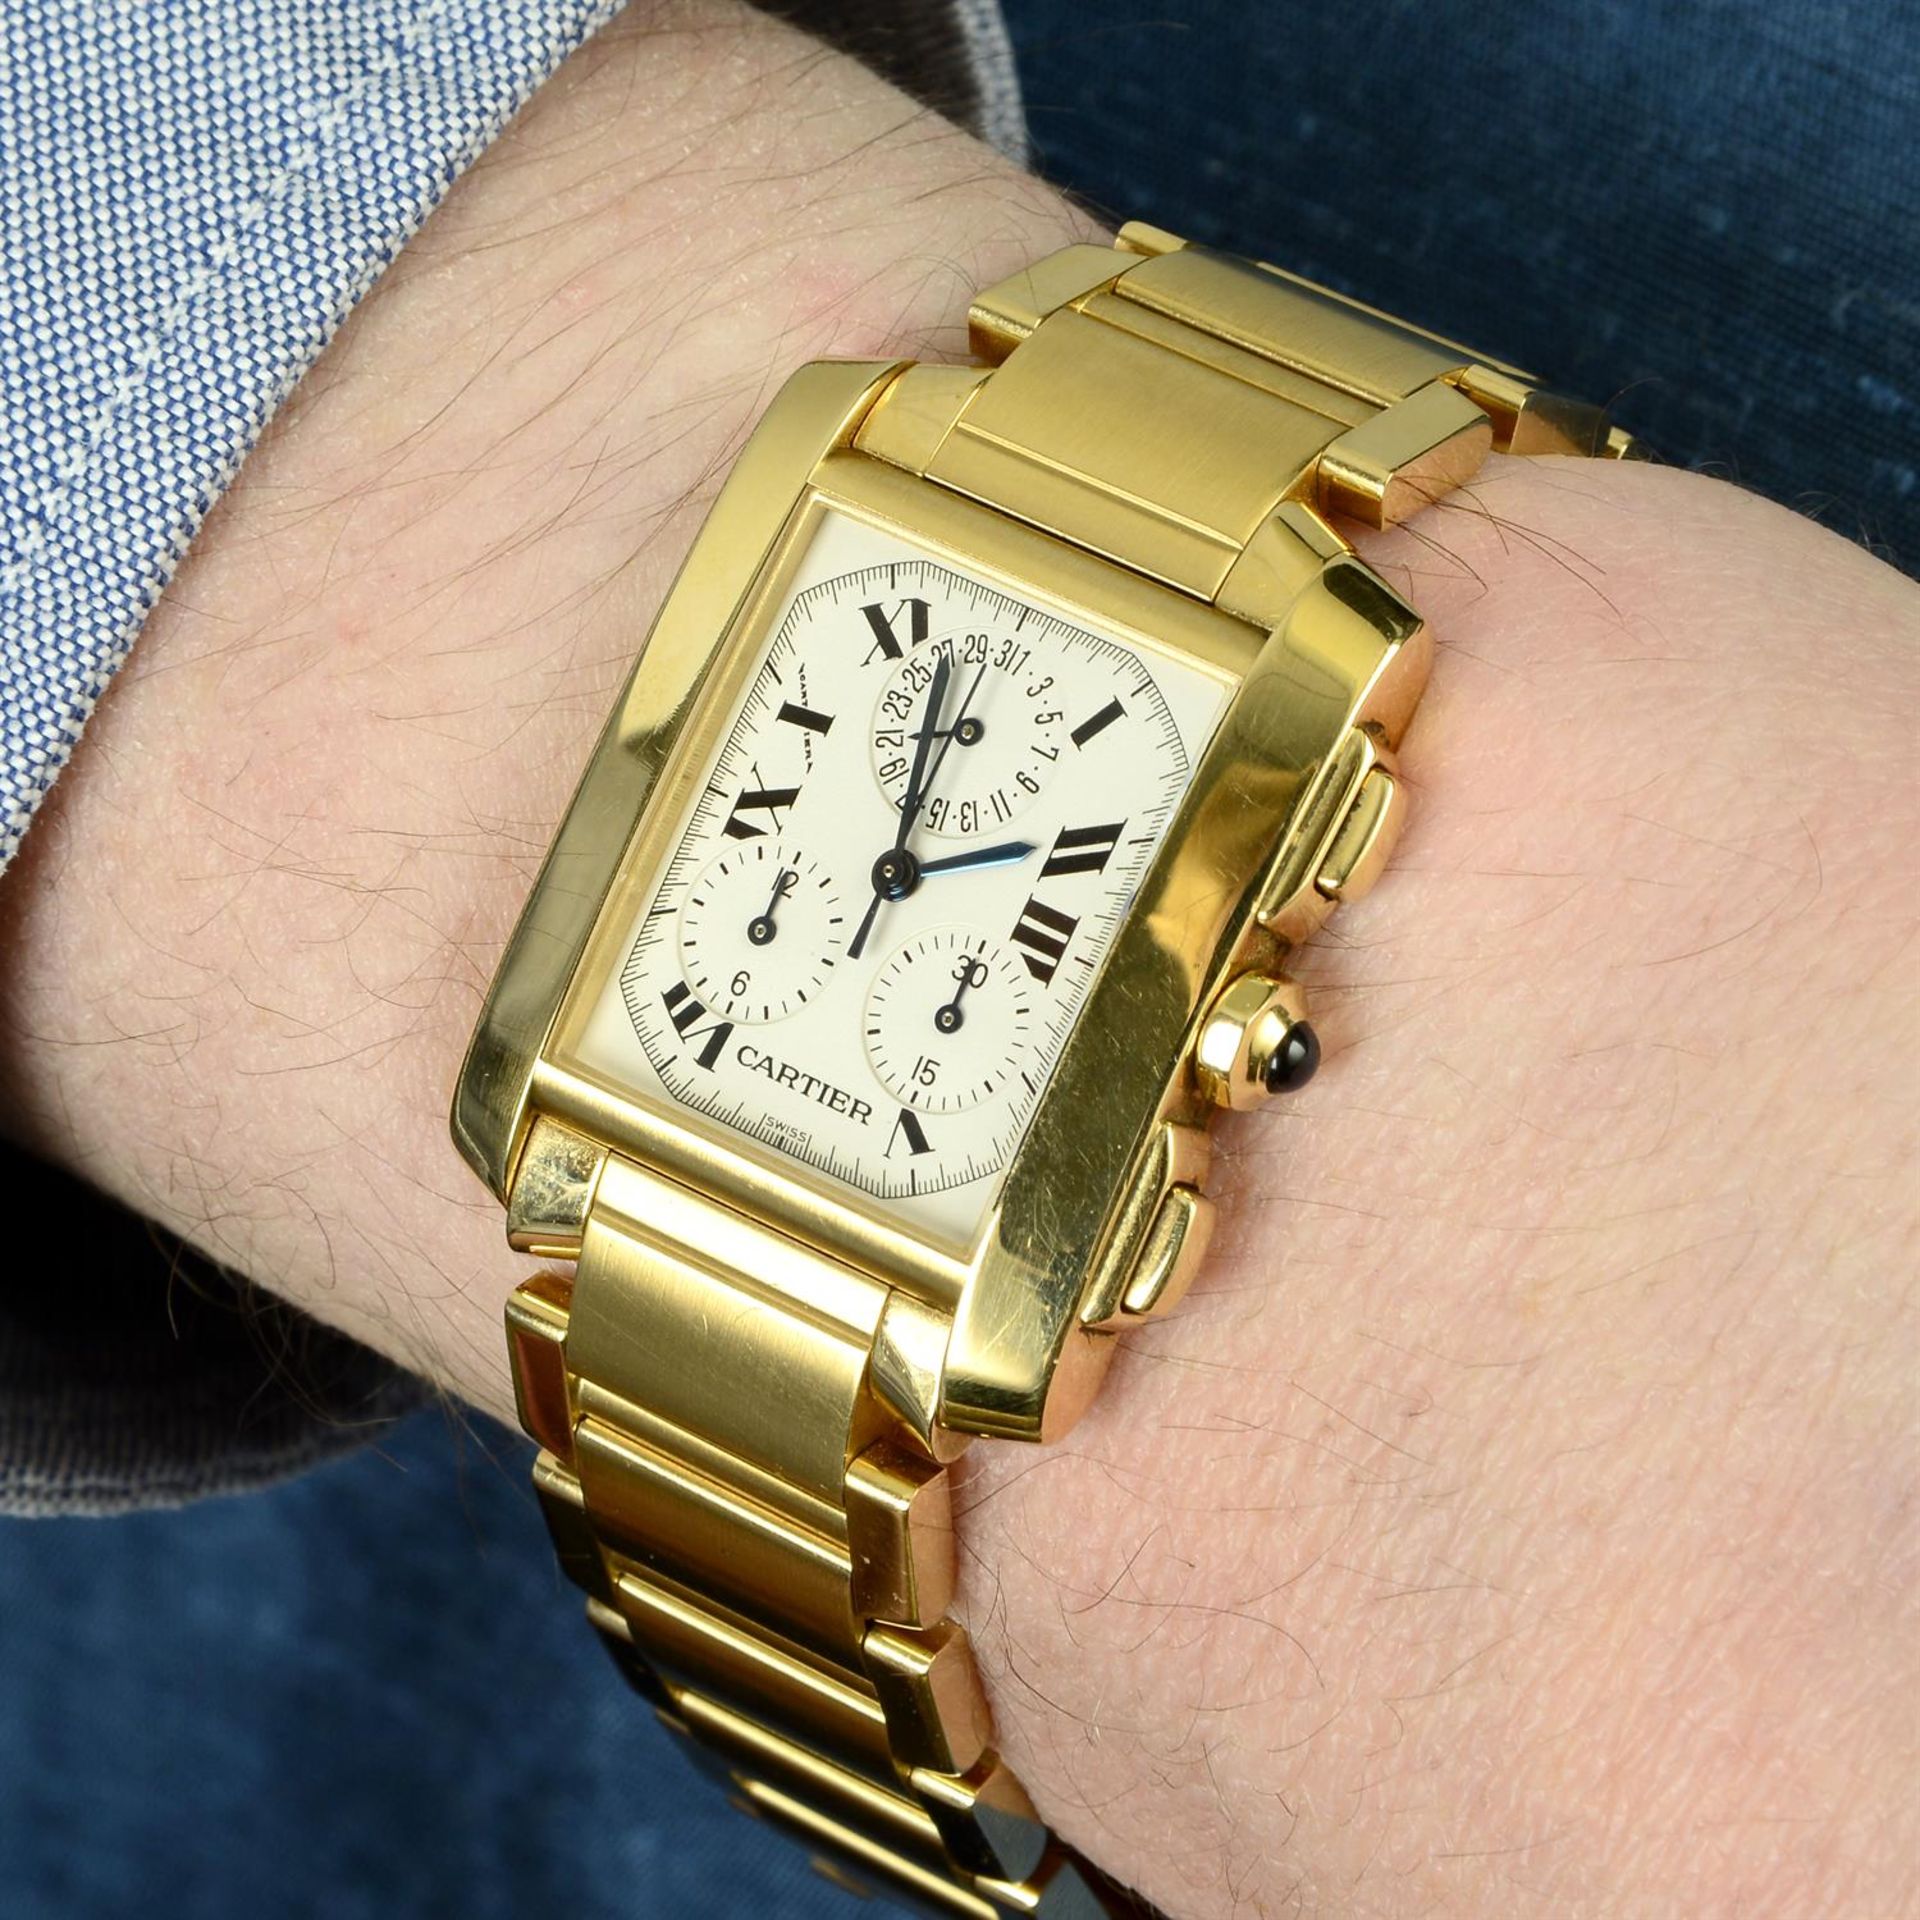 CARTIER - an 18ct yellow gold Tank Francaise chronograph bracelet watch, 28mm. - Image 6 of 6